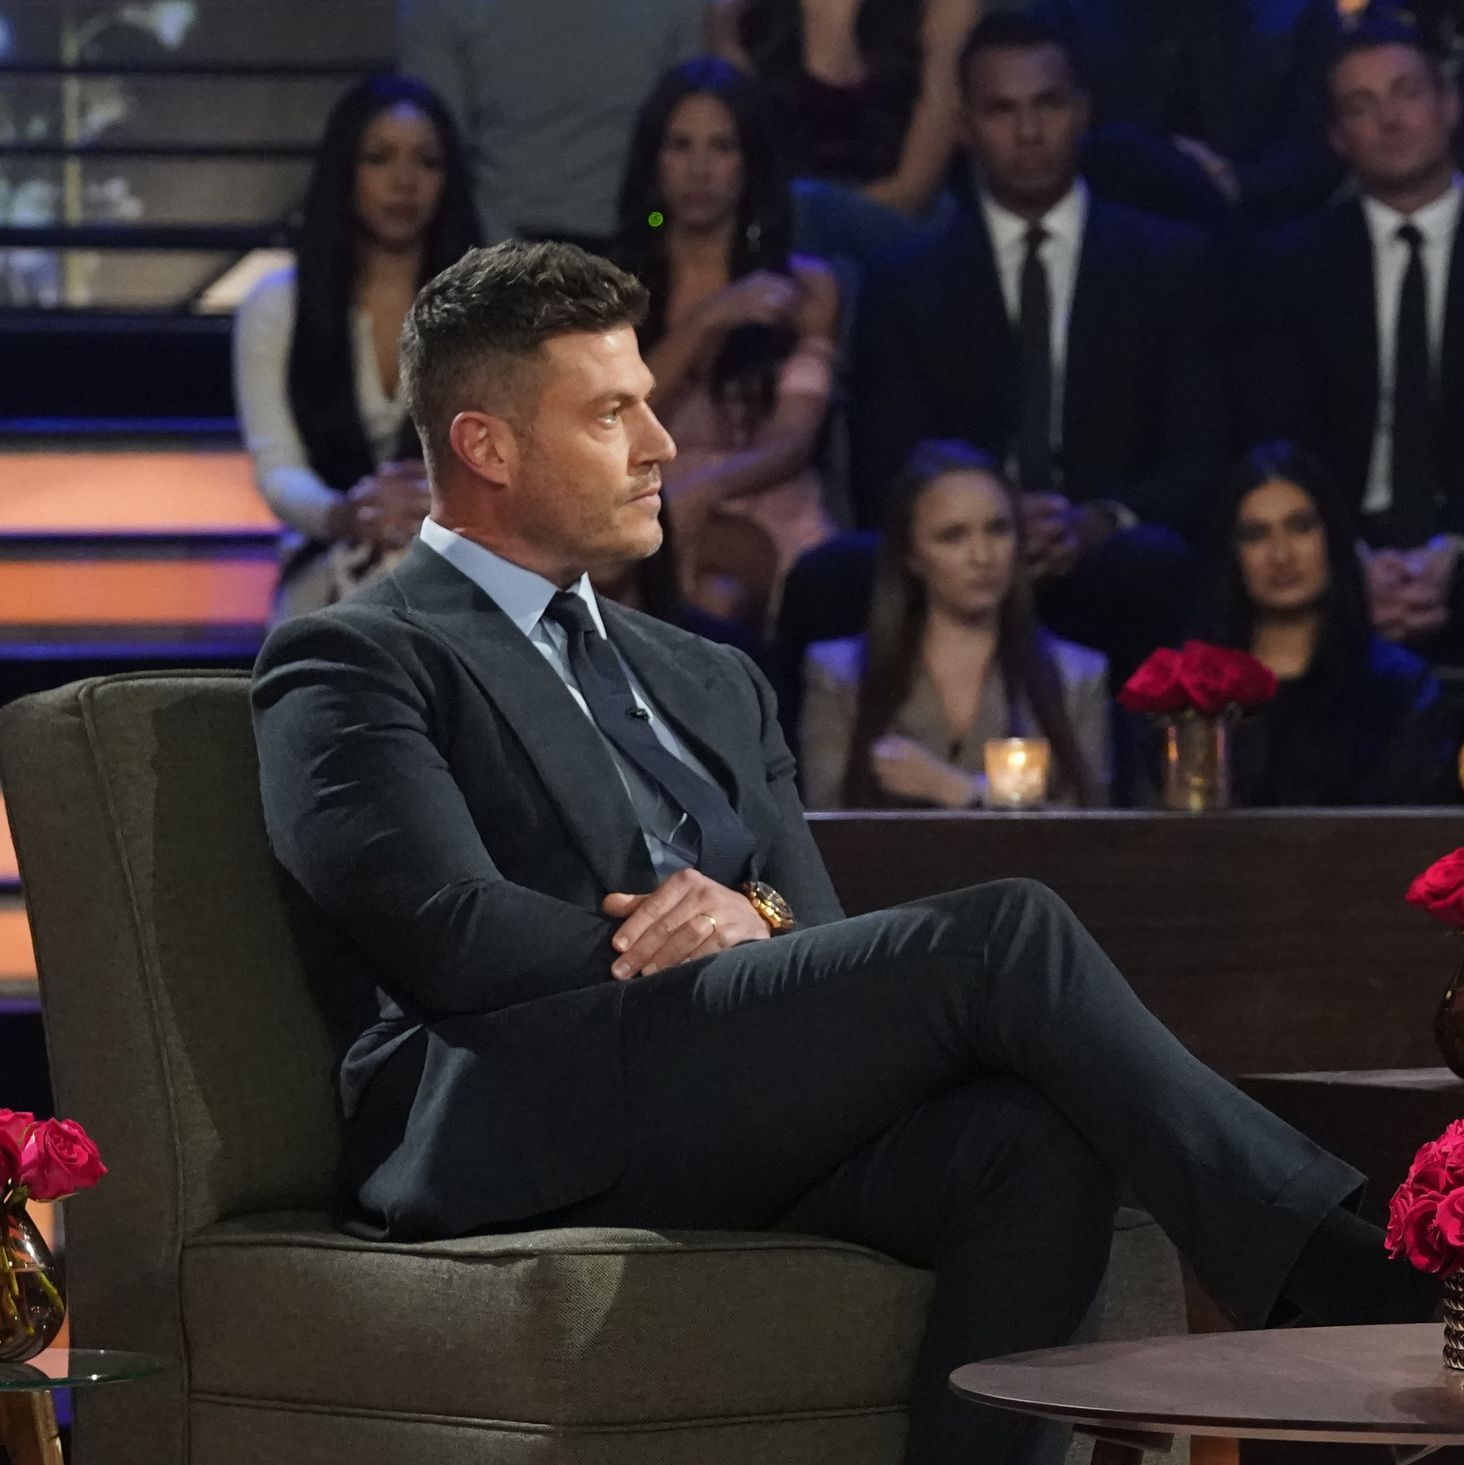 Fans Flip Out at Aaron and Genevieve Spotted Sitting Together in Bachelor Finale